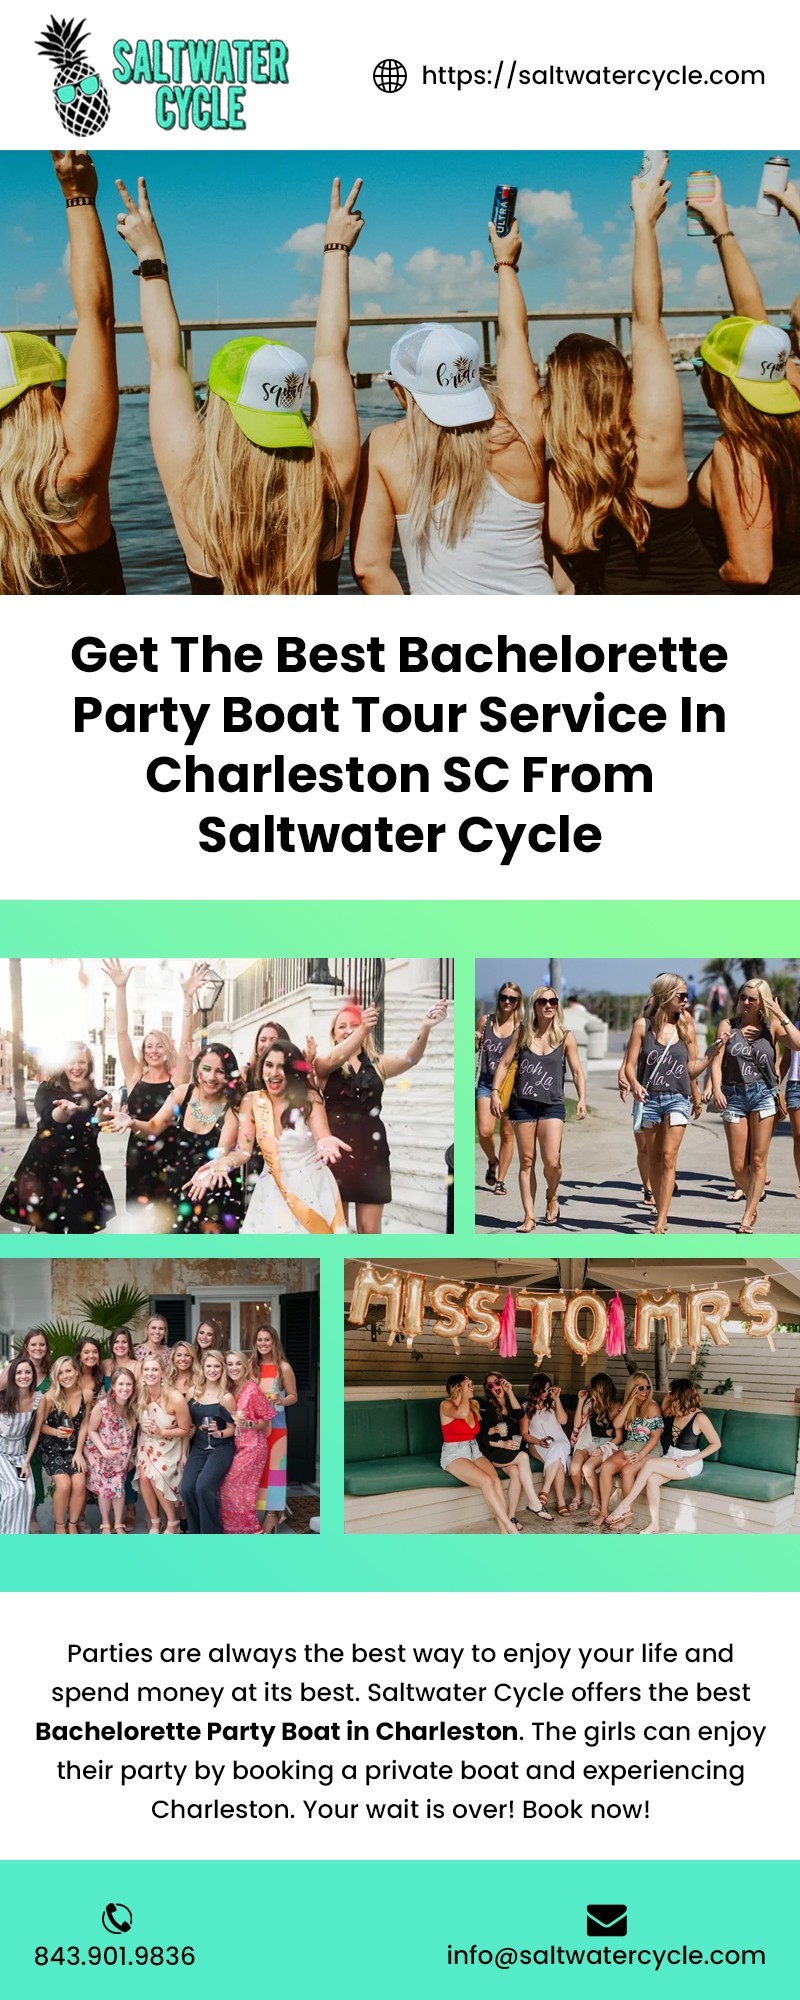 Get The Best Bachelorette Party Boat Tour Service in Charleston SC From Saltwater Cycle